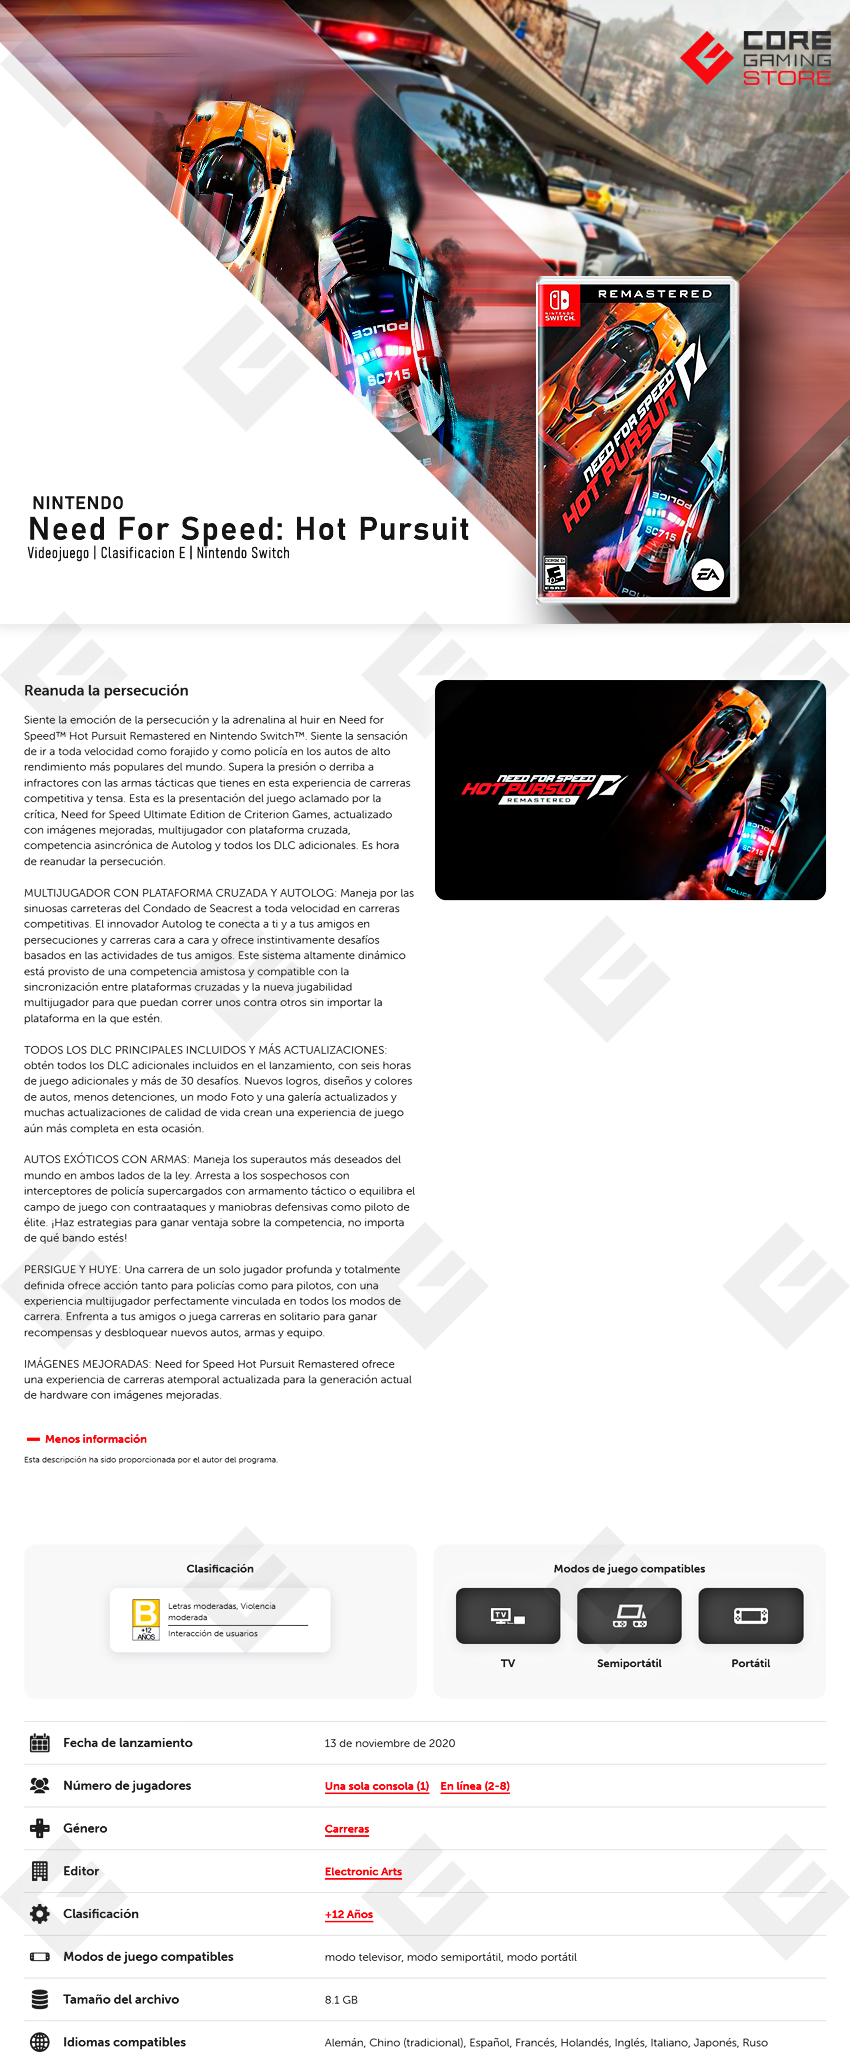 Videojuego Need For Speed: Hot Pursuit, Standard Edition, para Nintendo Switch